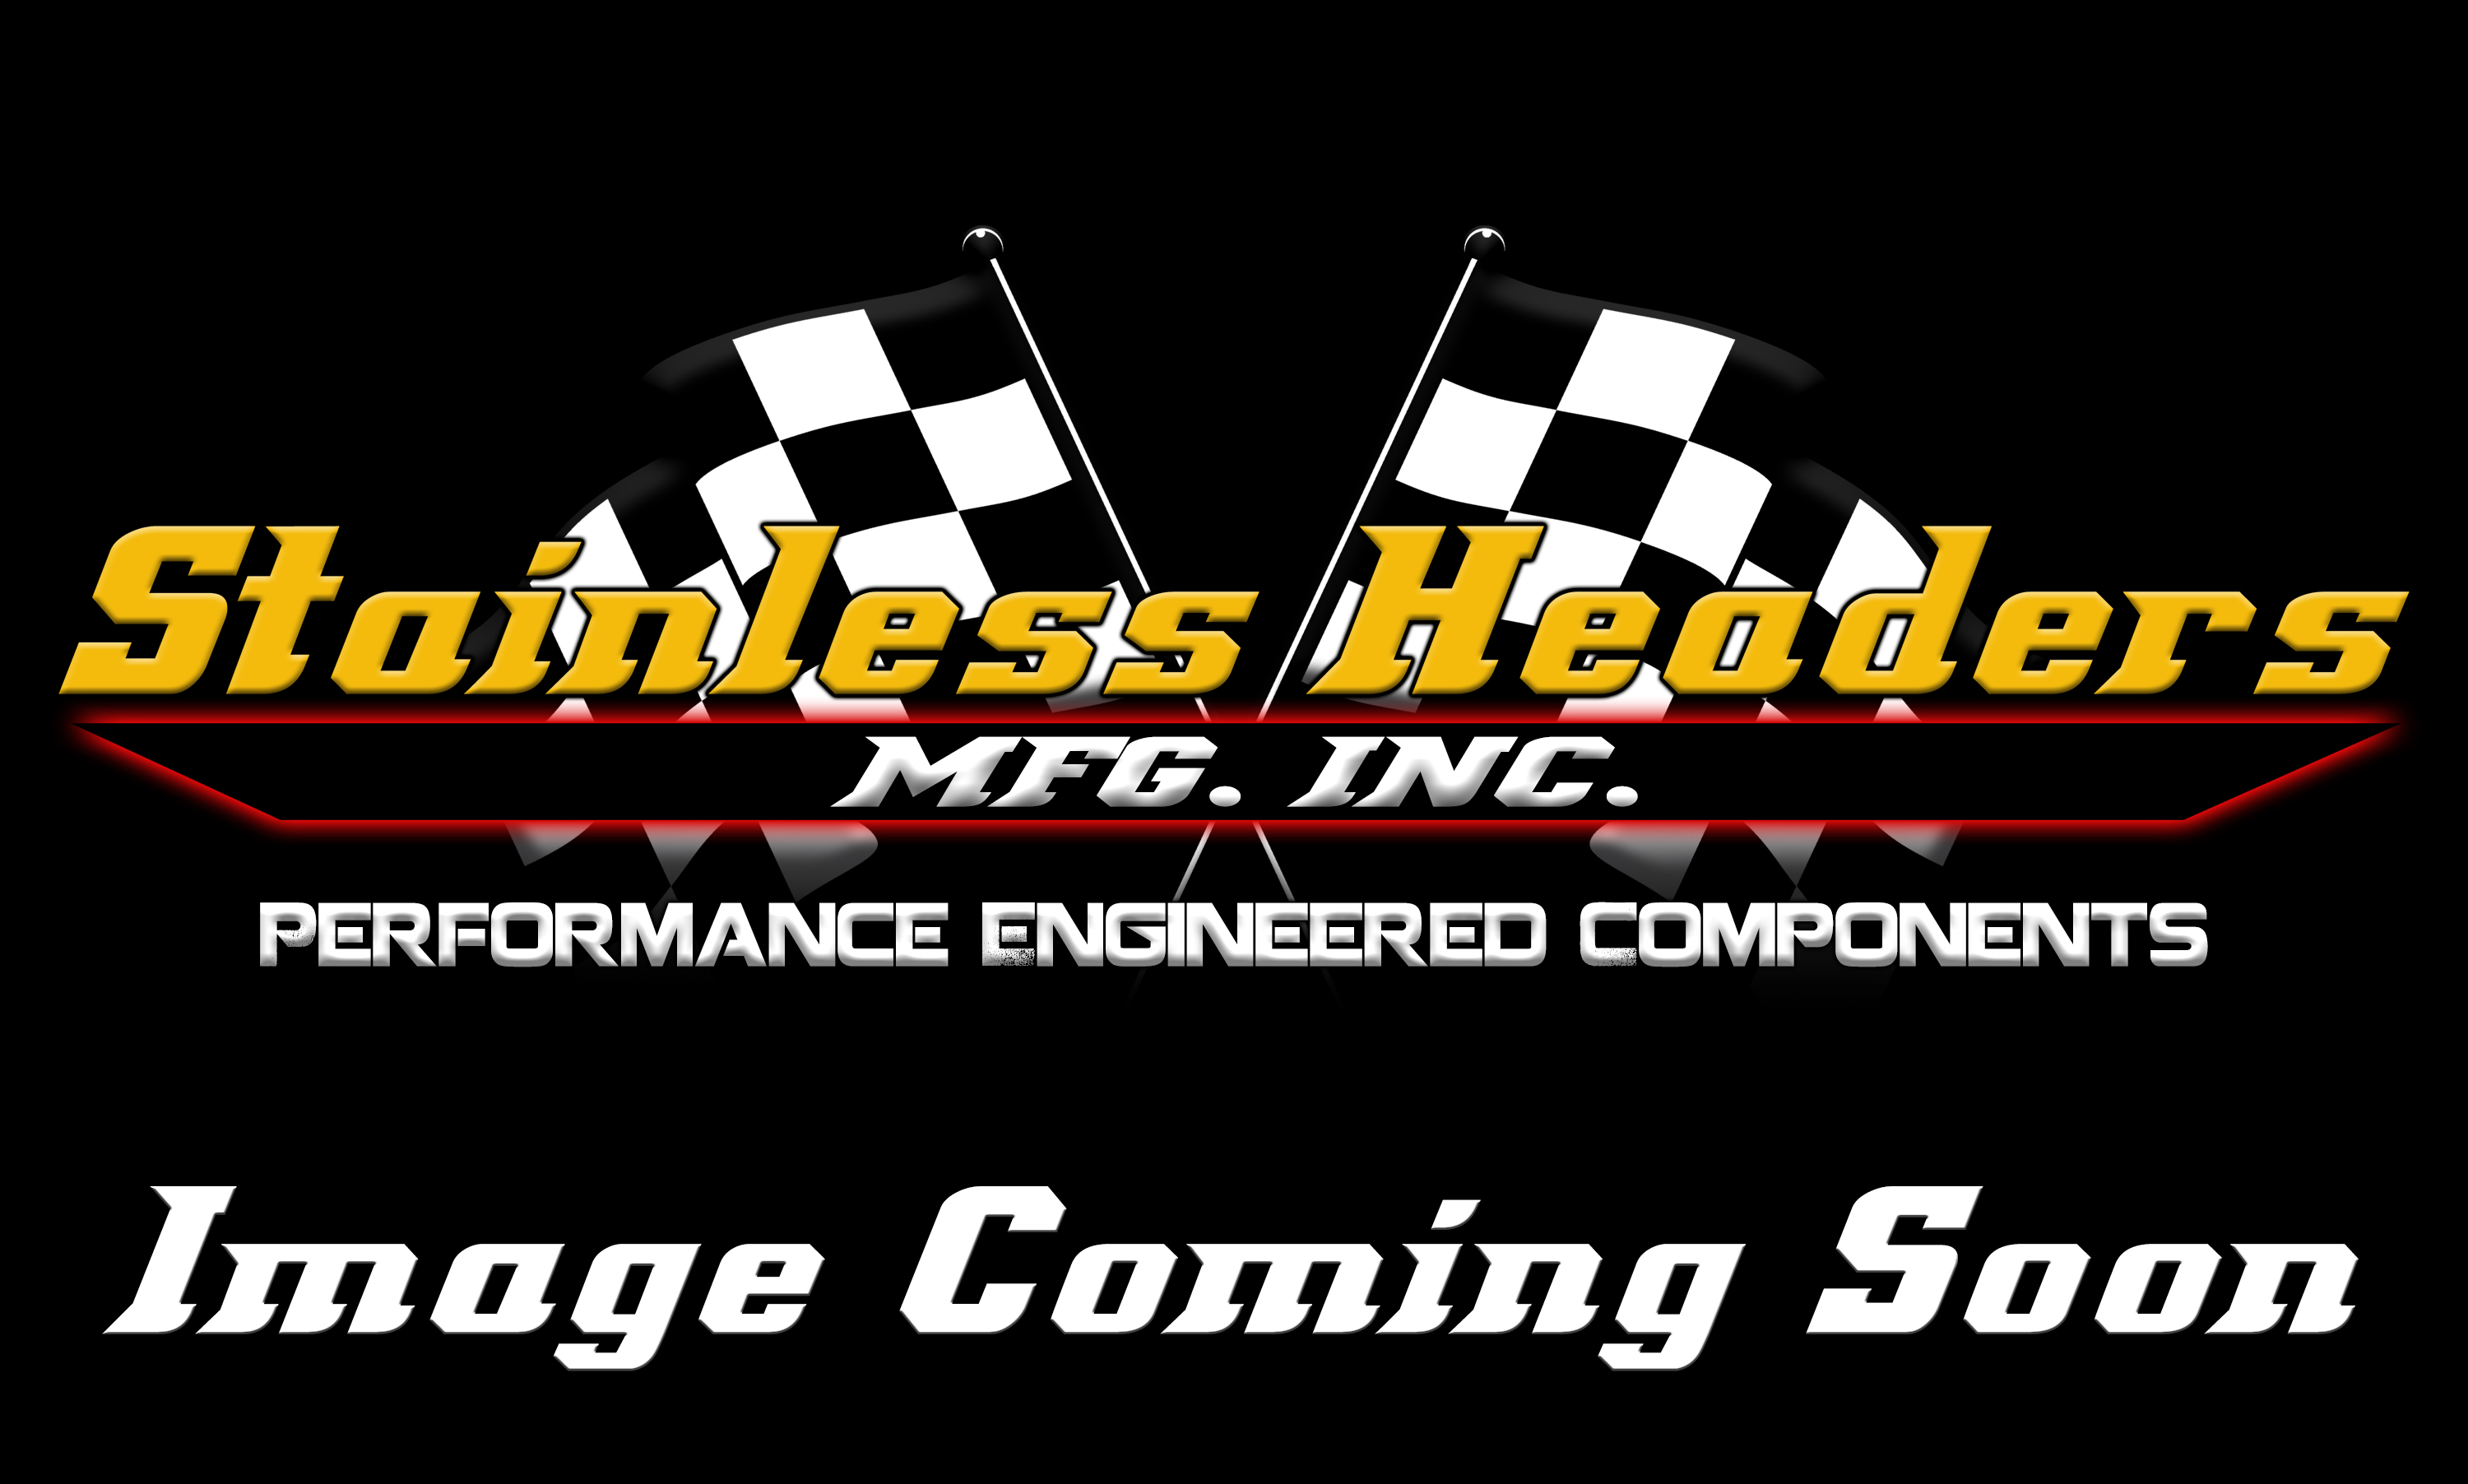 Stainless Headers - 2 1/4" Primary 5 into 1 Performance Merge Collector-16ga 304ss